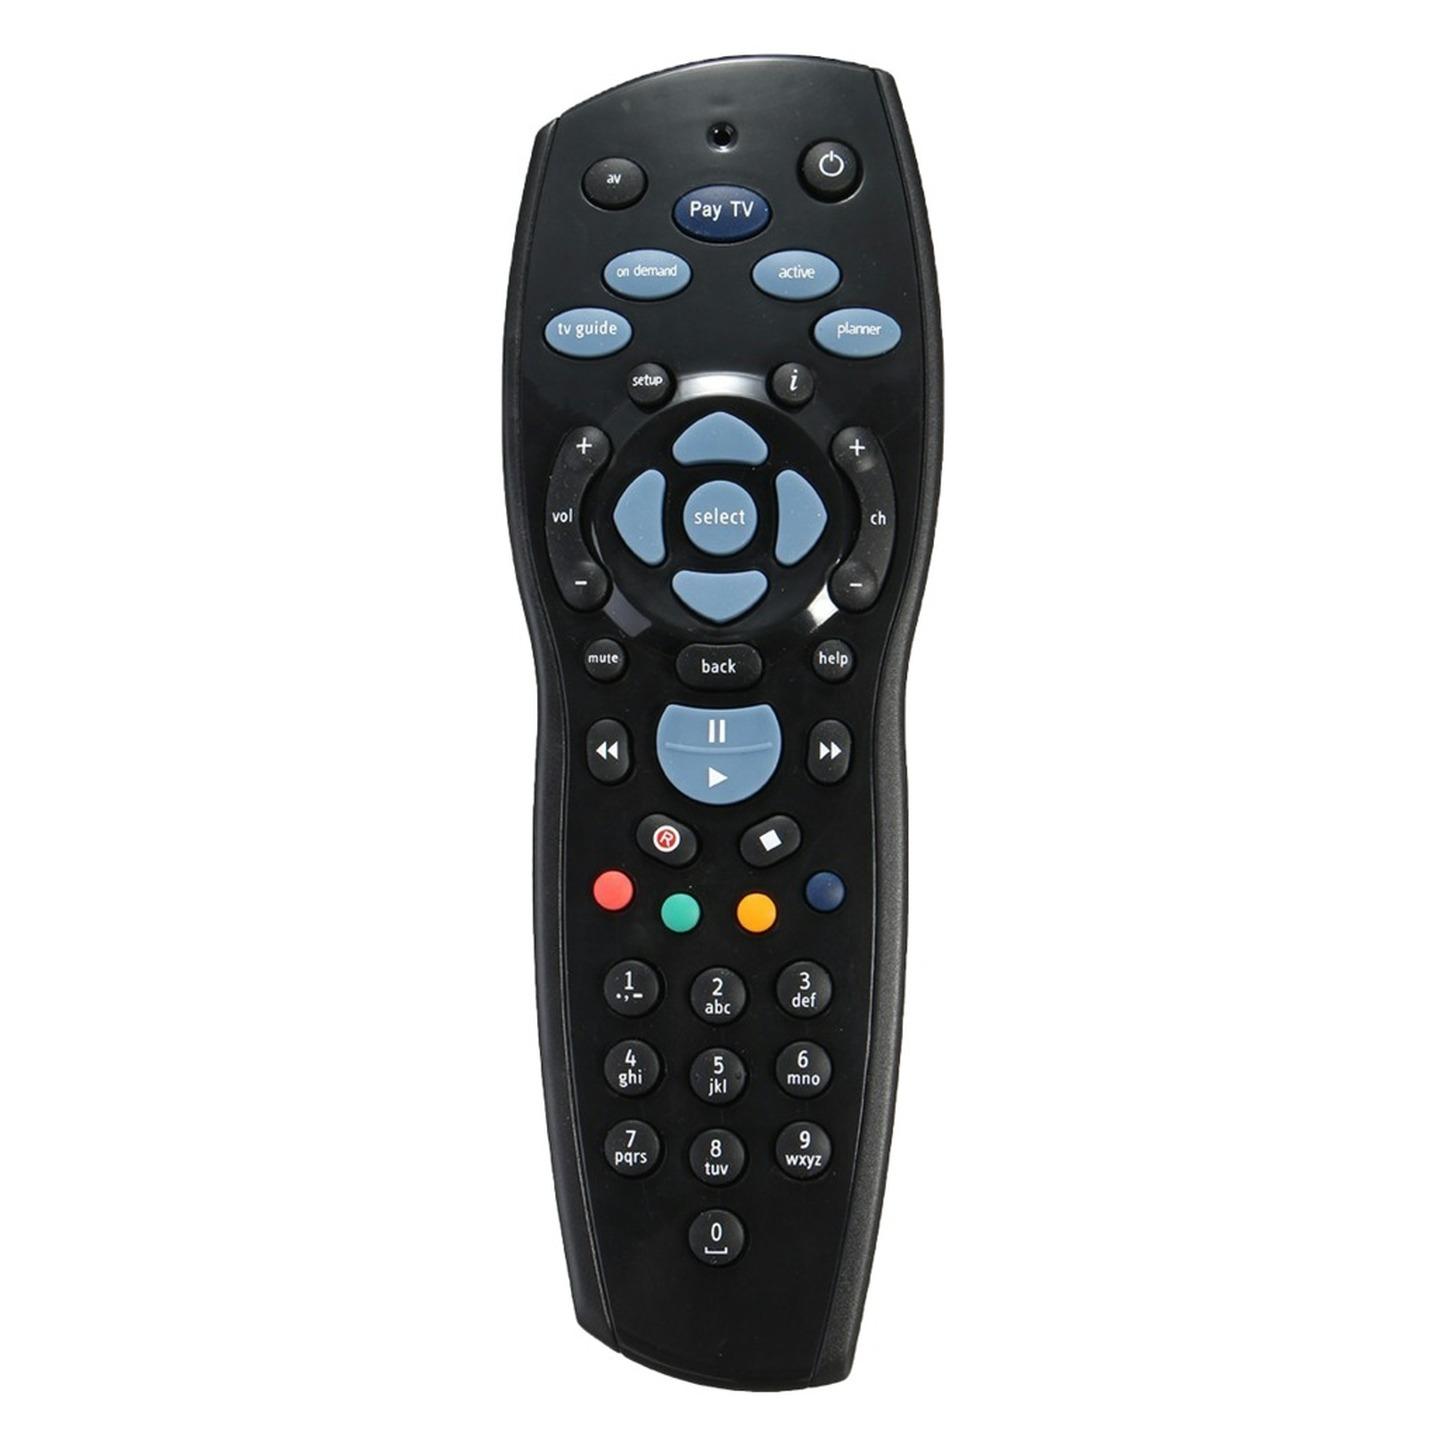 Remote Control for Recordable Digital Pay TV